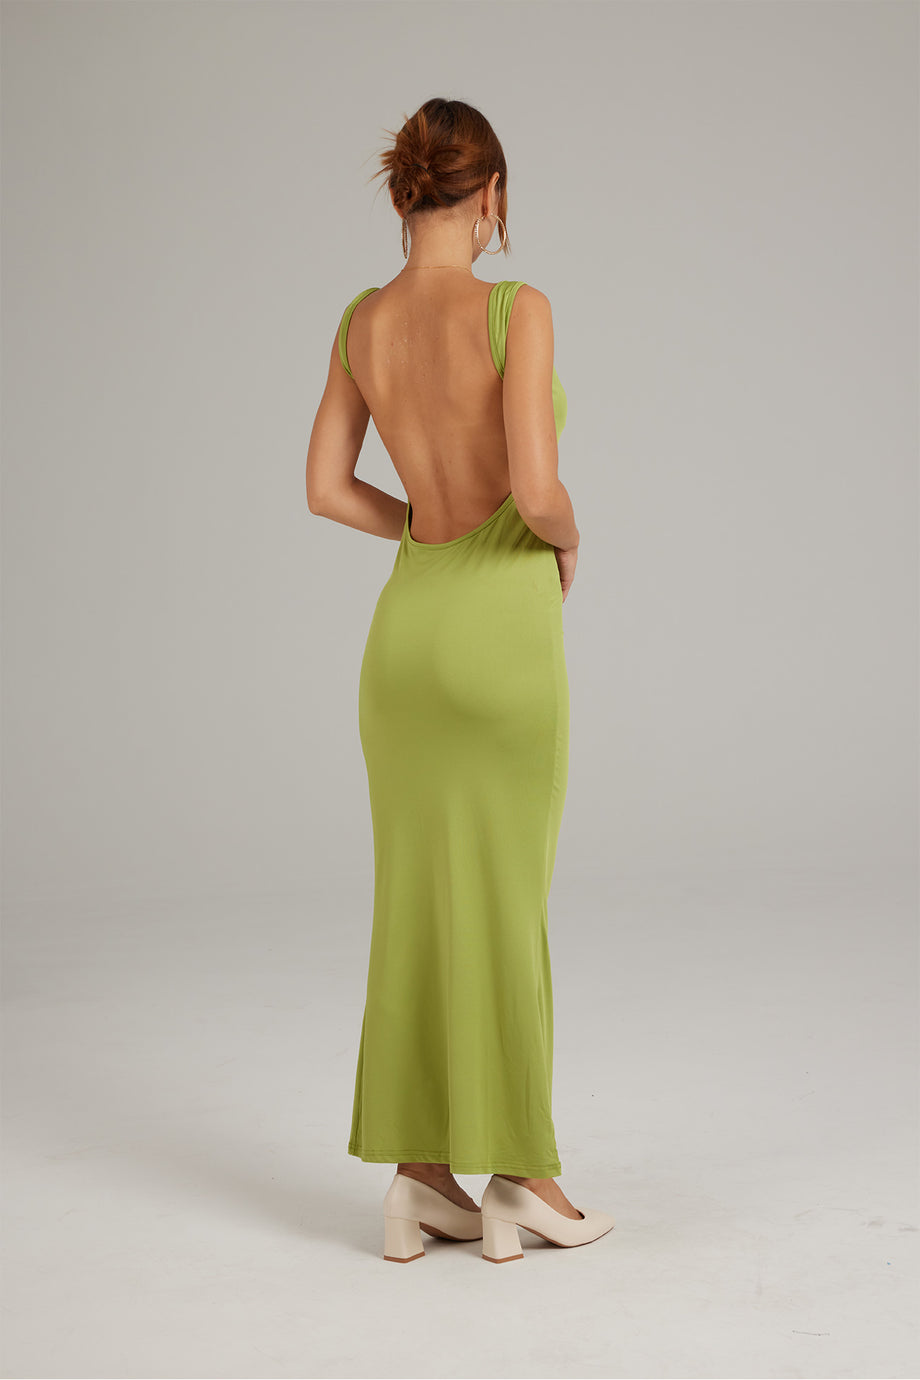 low backless dresses